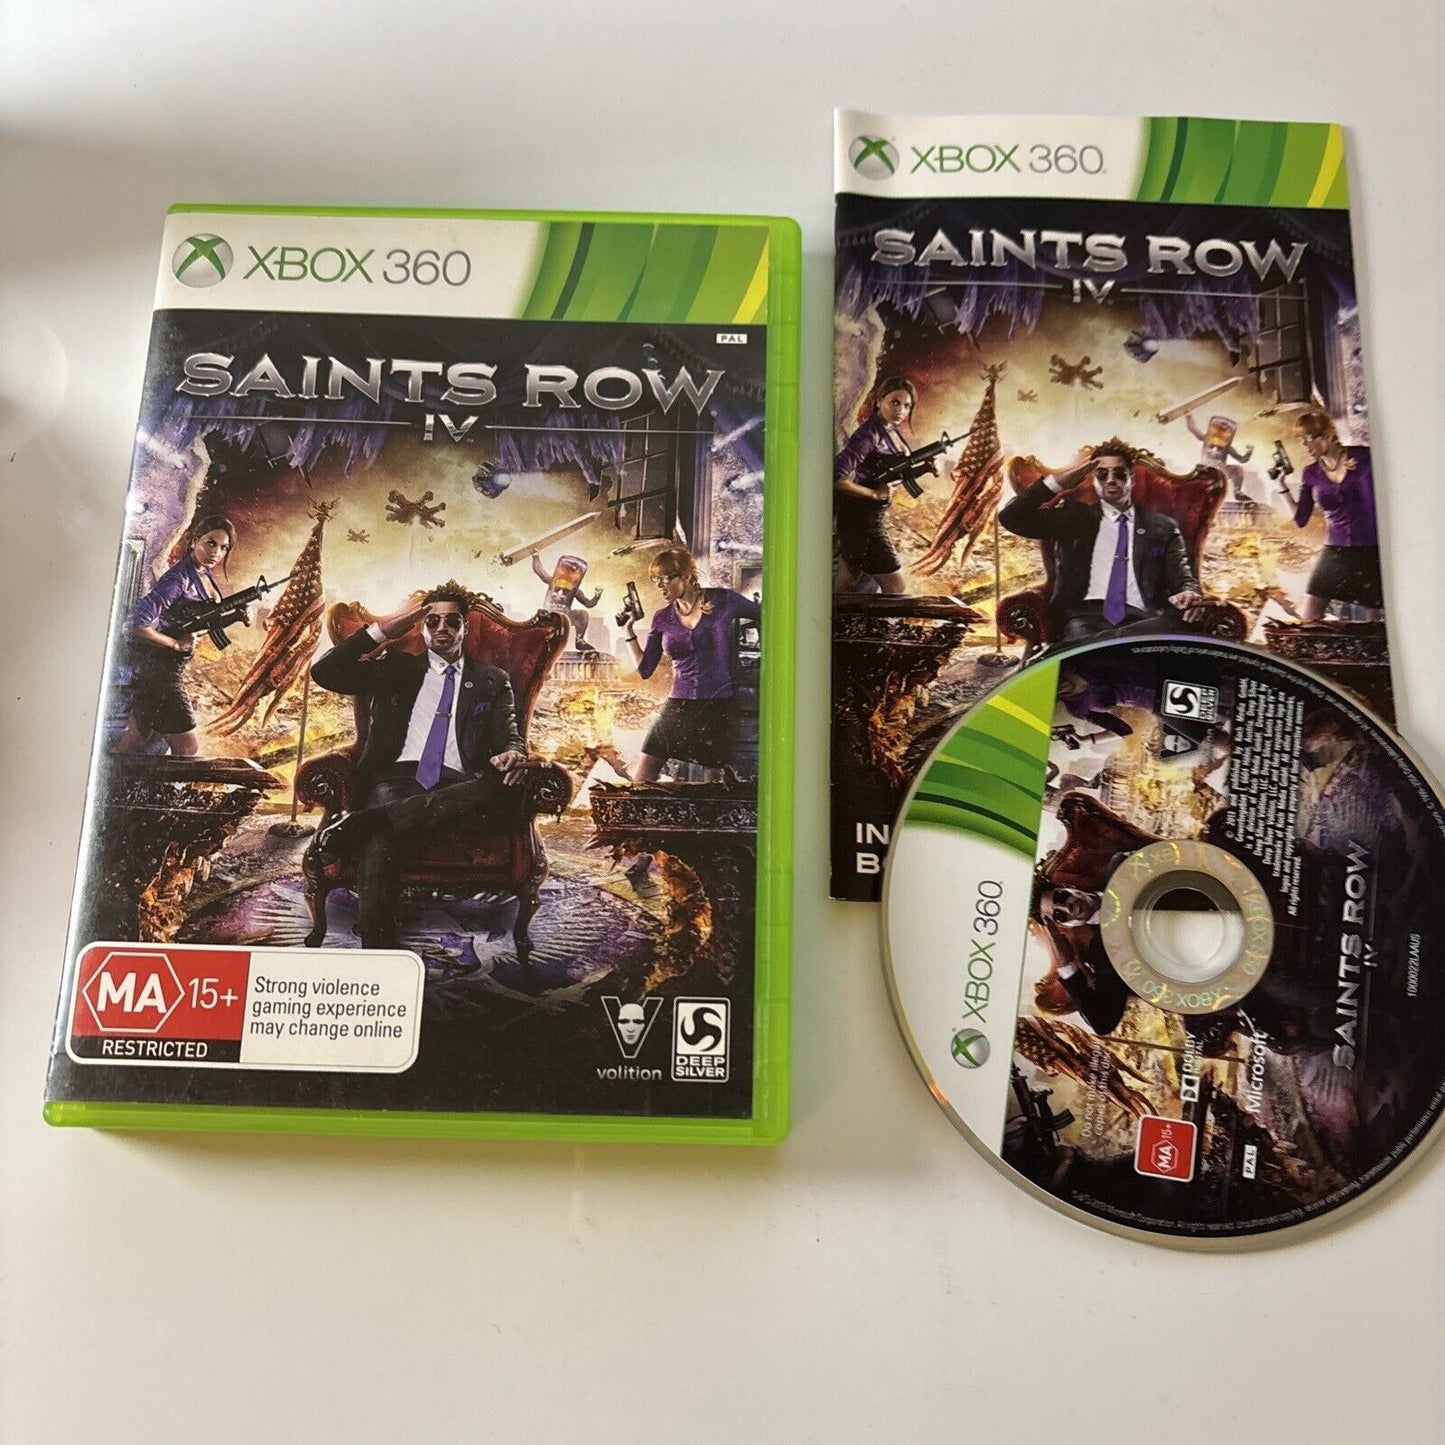 Saints Row IV Microsoft Xbox 360 PAL Game with Manual Complete